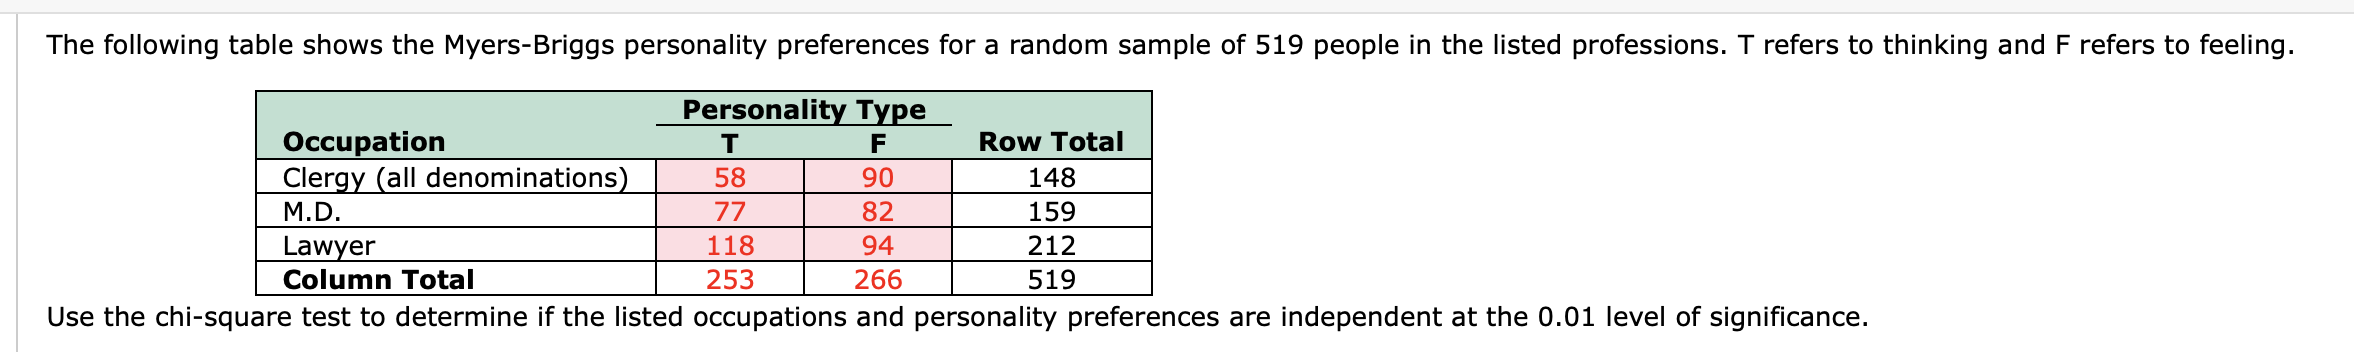 The following table shows the Myers-Briggs personality preferences for a random sample of 519 people in the listed professions. T refers to thinking and F refers to feeling.
Personality Type
Row Total
Occupation
Clergy (all denominations)
M.D.
58
90
148
77
82
159
Lawyer
Column Total
118
94
212
253
266
519
Use the chi-square test to determine if the listed occupations and personality preferences are independent at the 0.01 level of significance.
